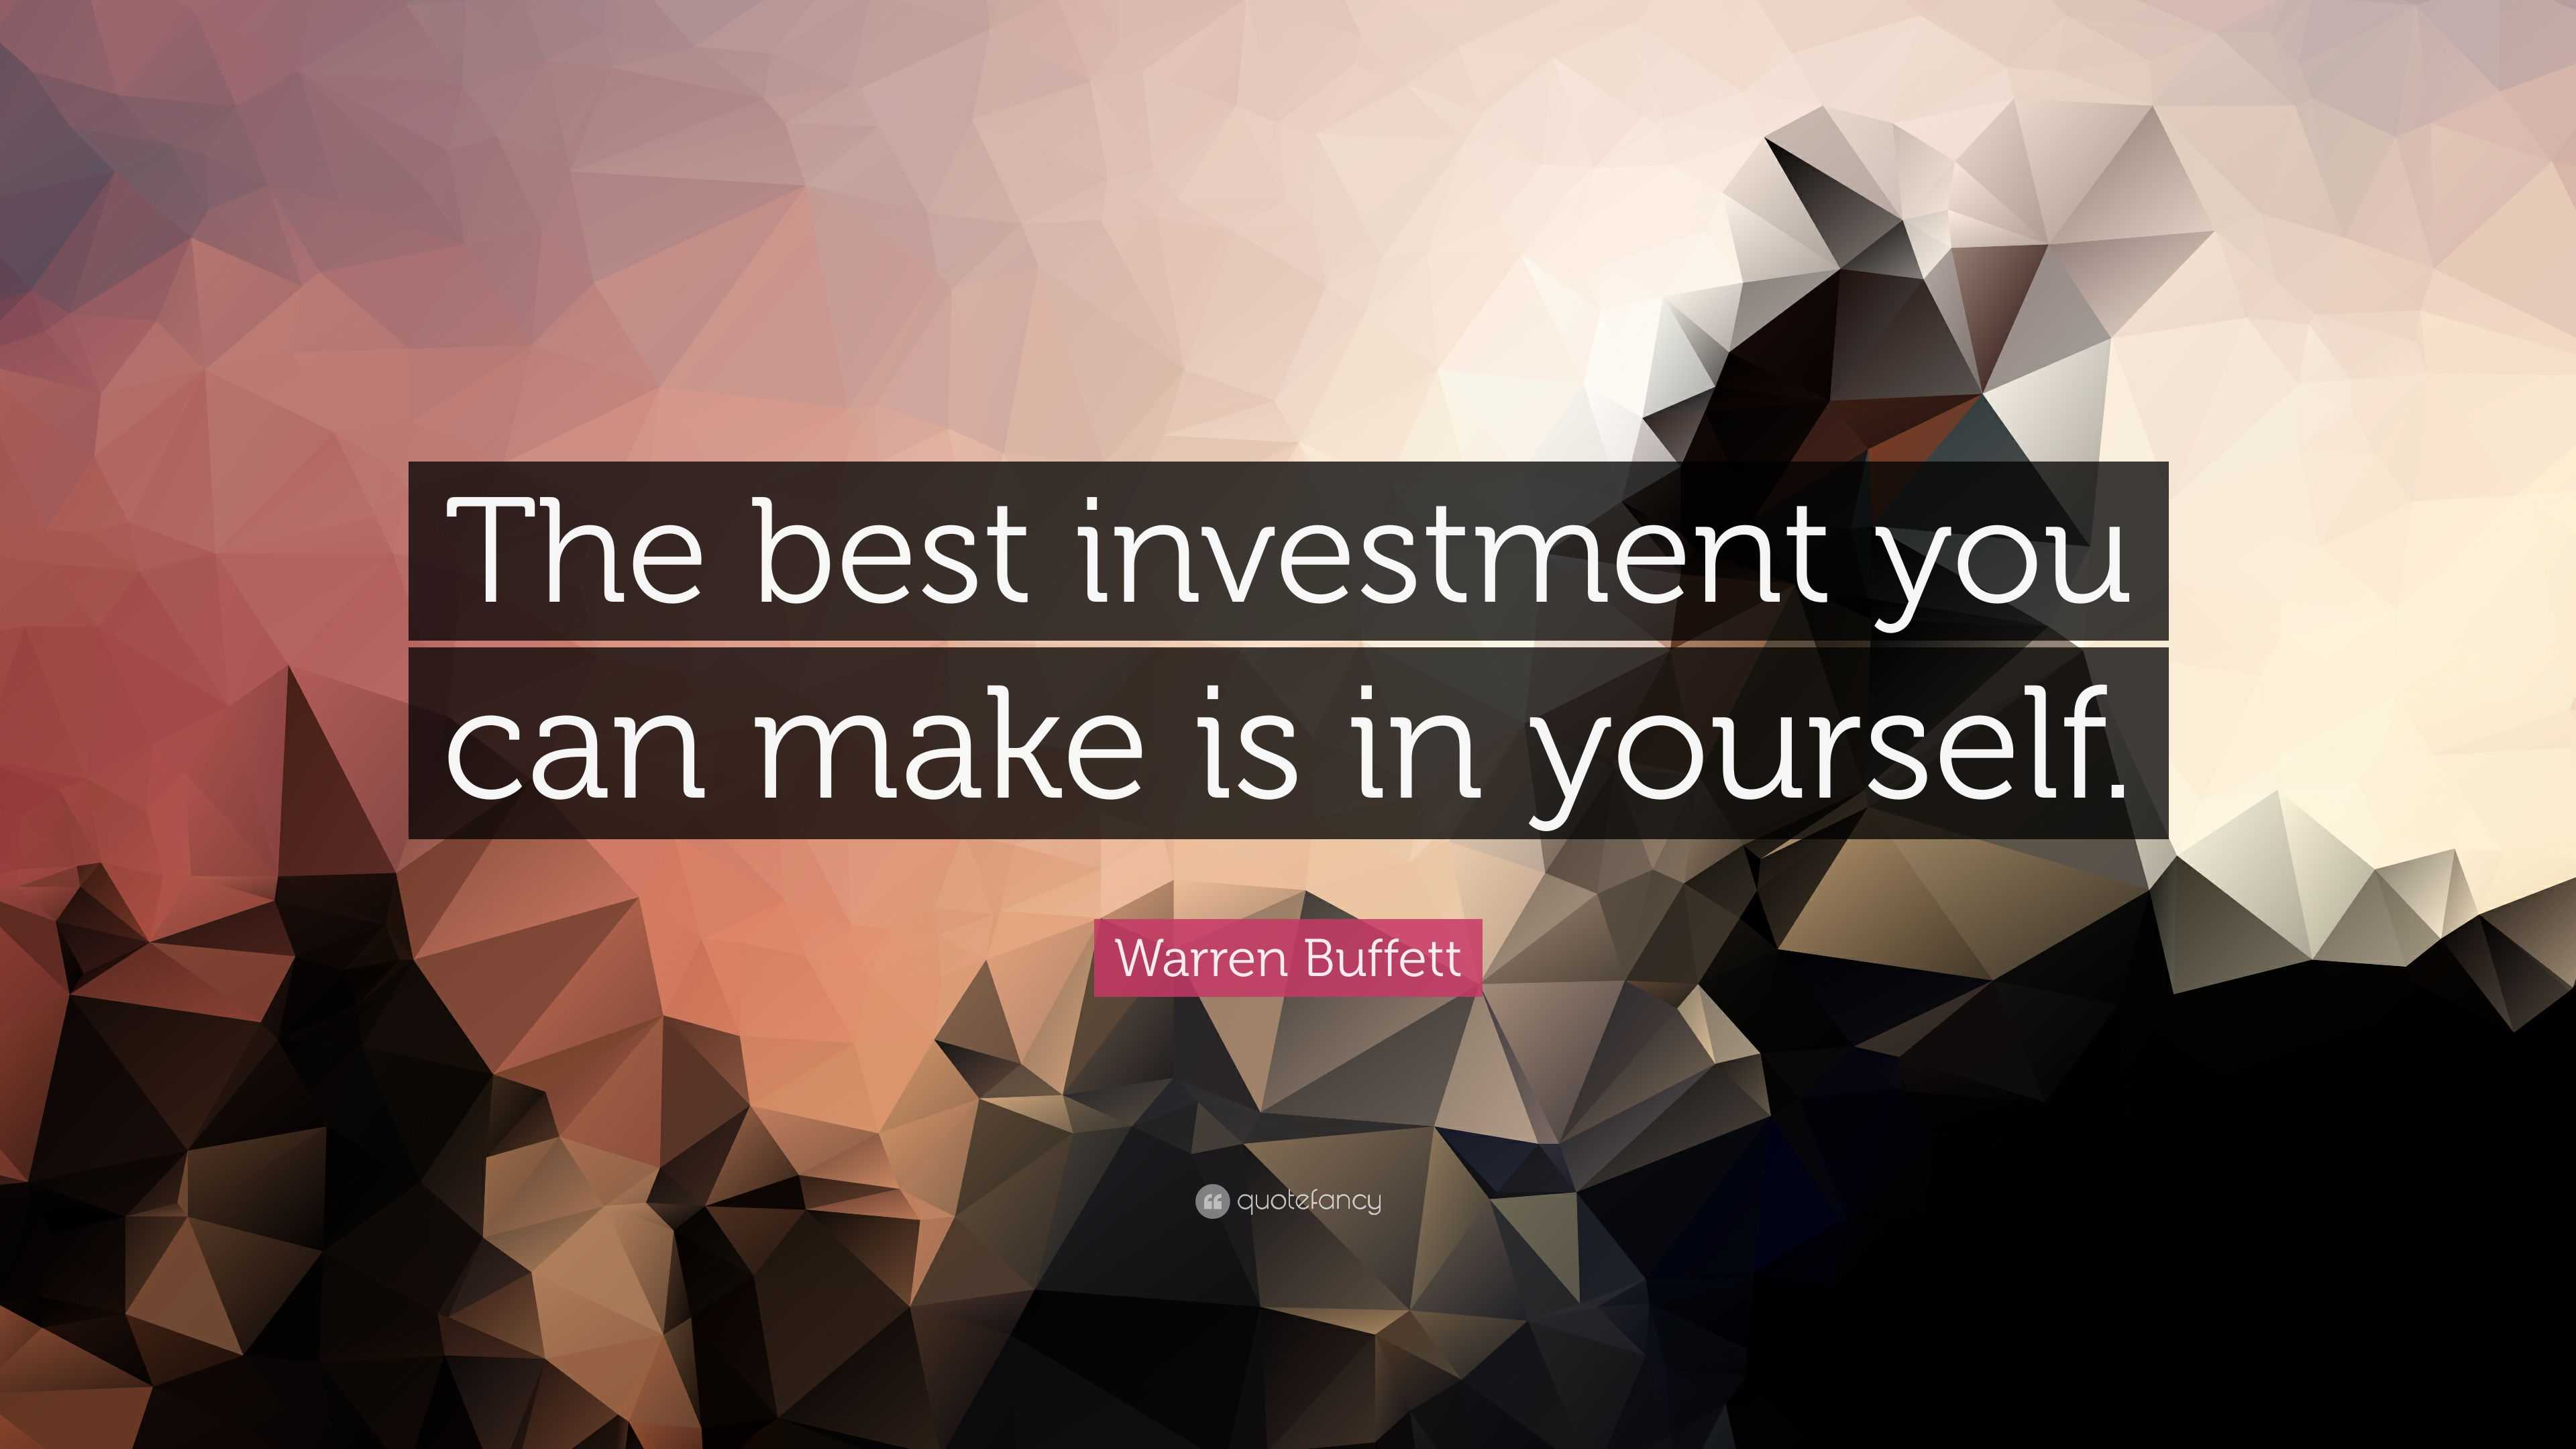 Warren Buffett Quote “The best investment you can make is in yourself.”